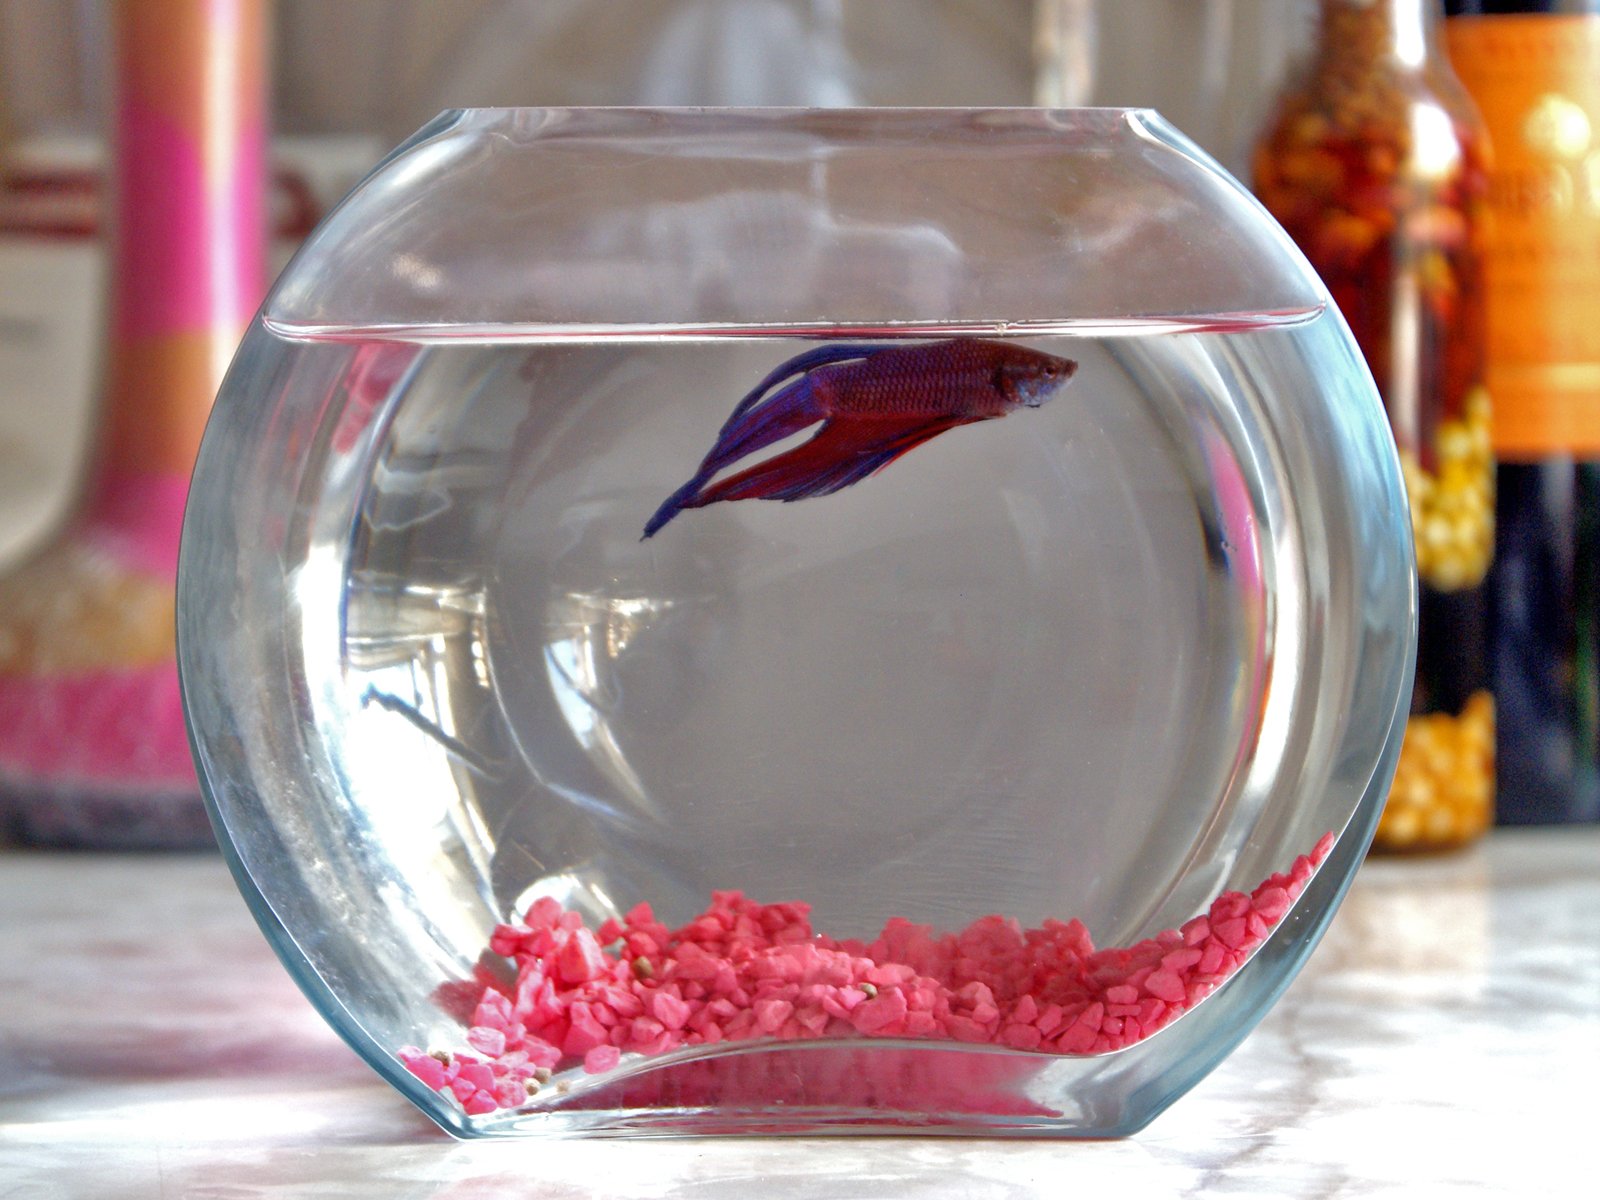 a close up of a fish in a glass bowl